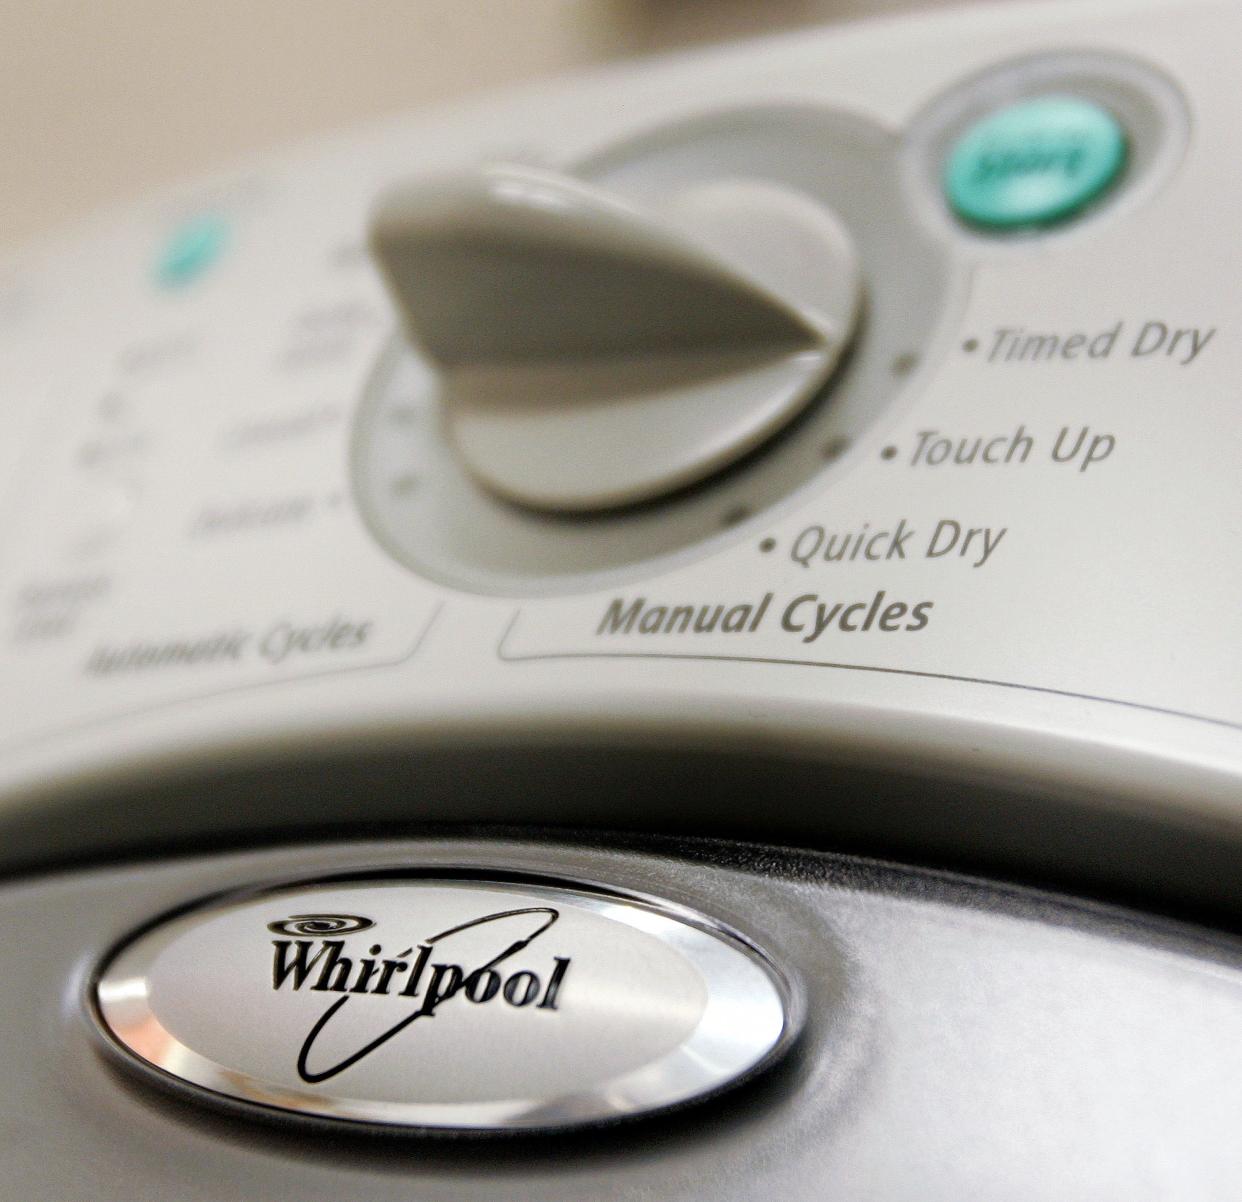 A Whirlpool logo is seen on a dryer. Photo by Tim Boyle/Getty Images